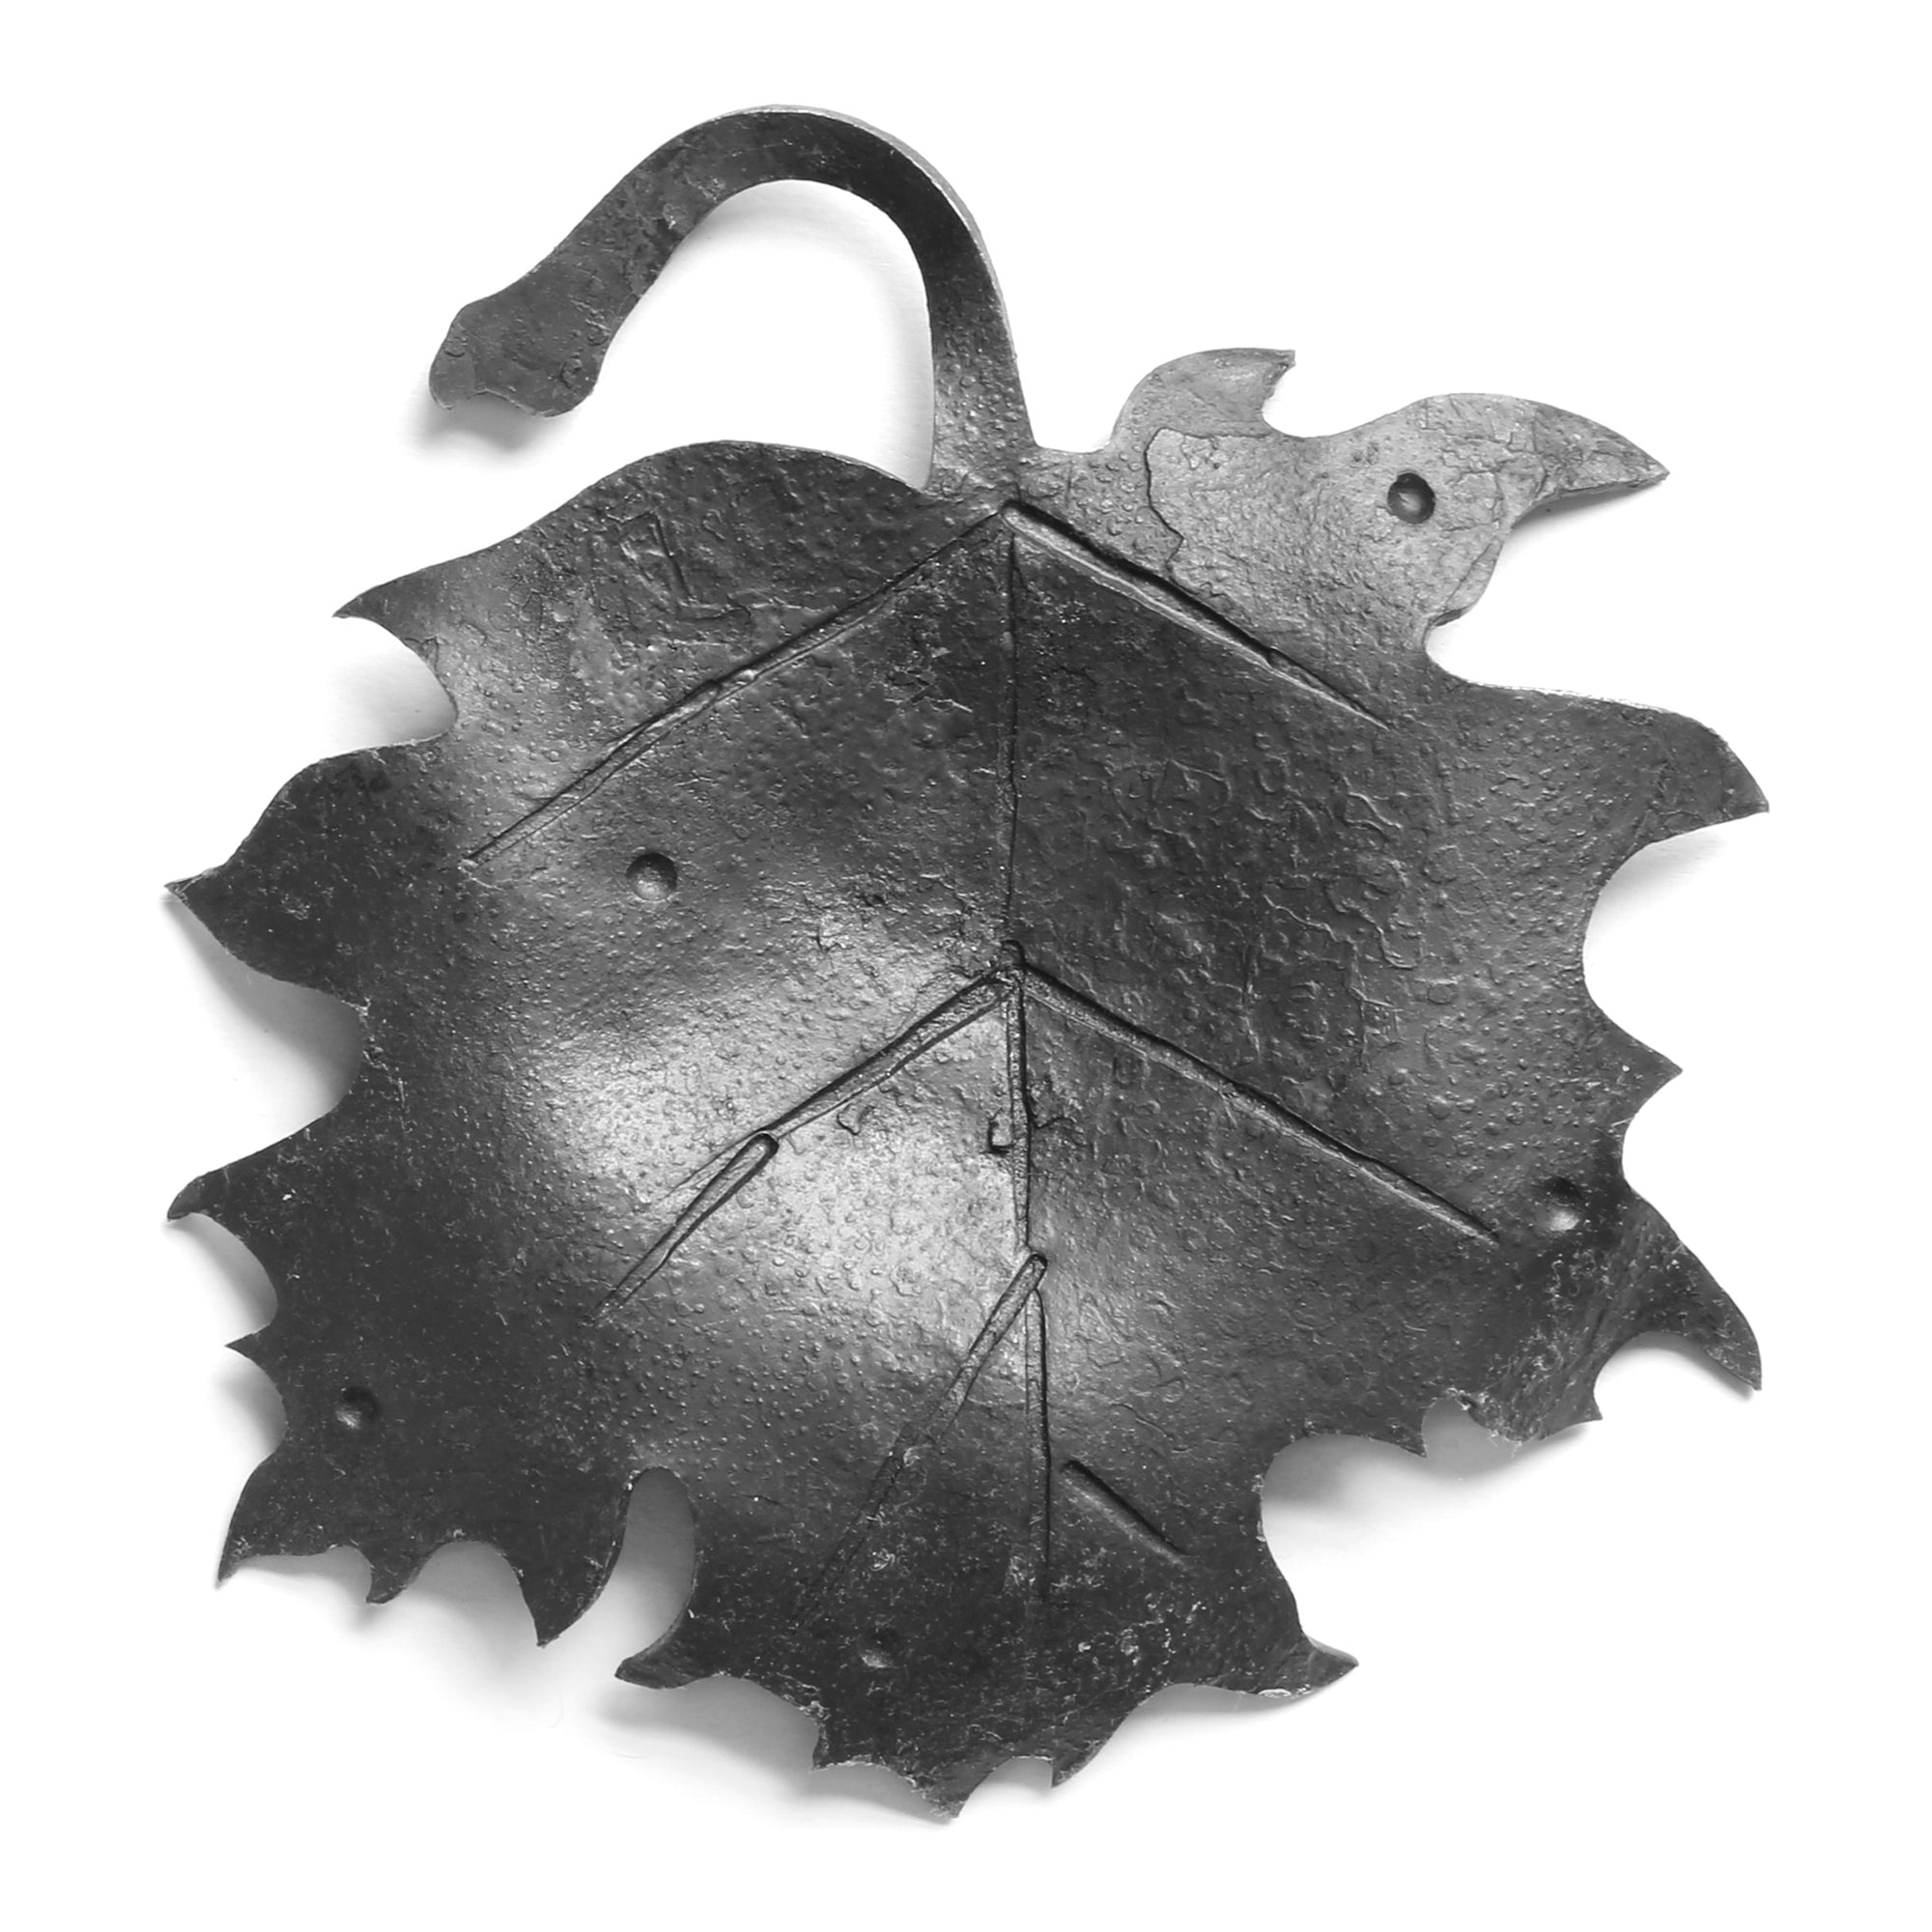 Maple Leaf Spoon Rest